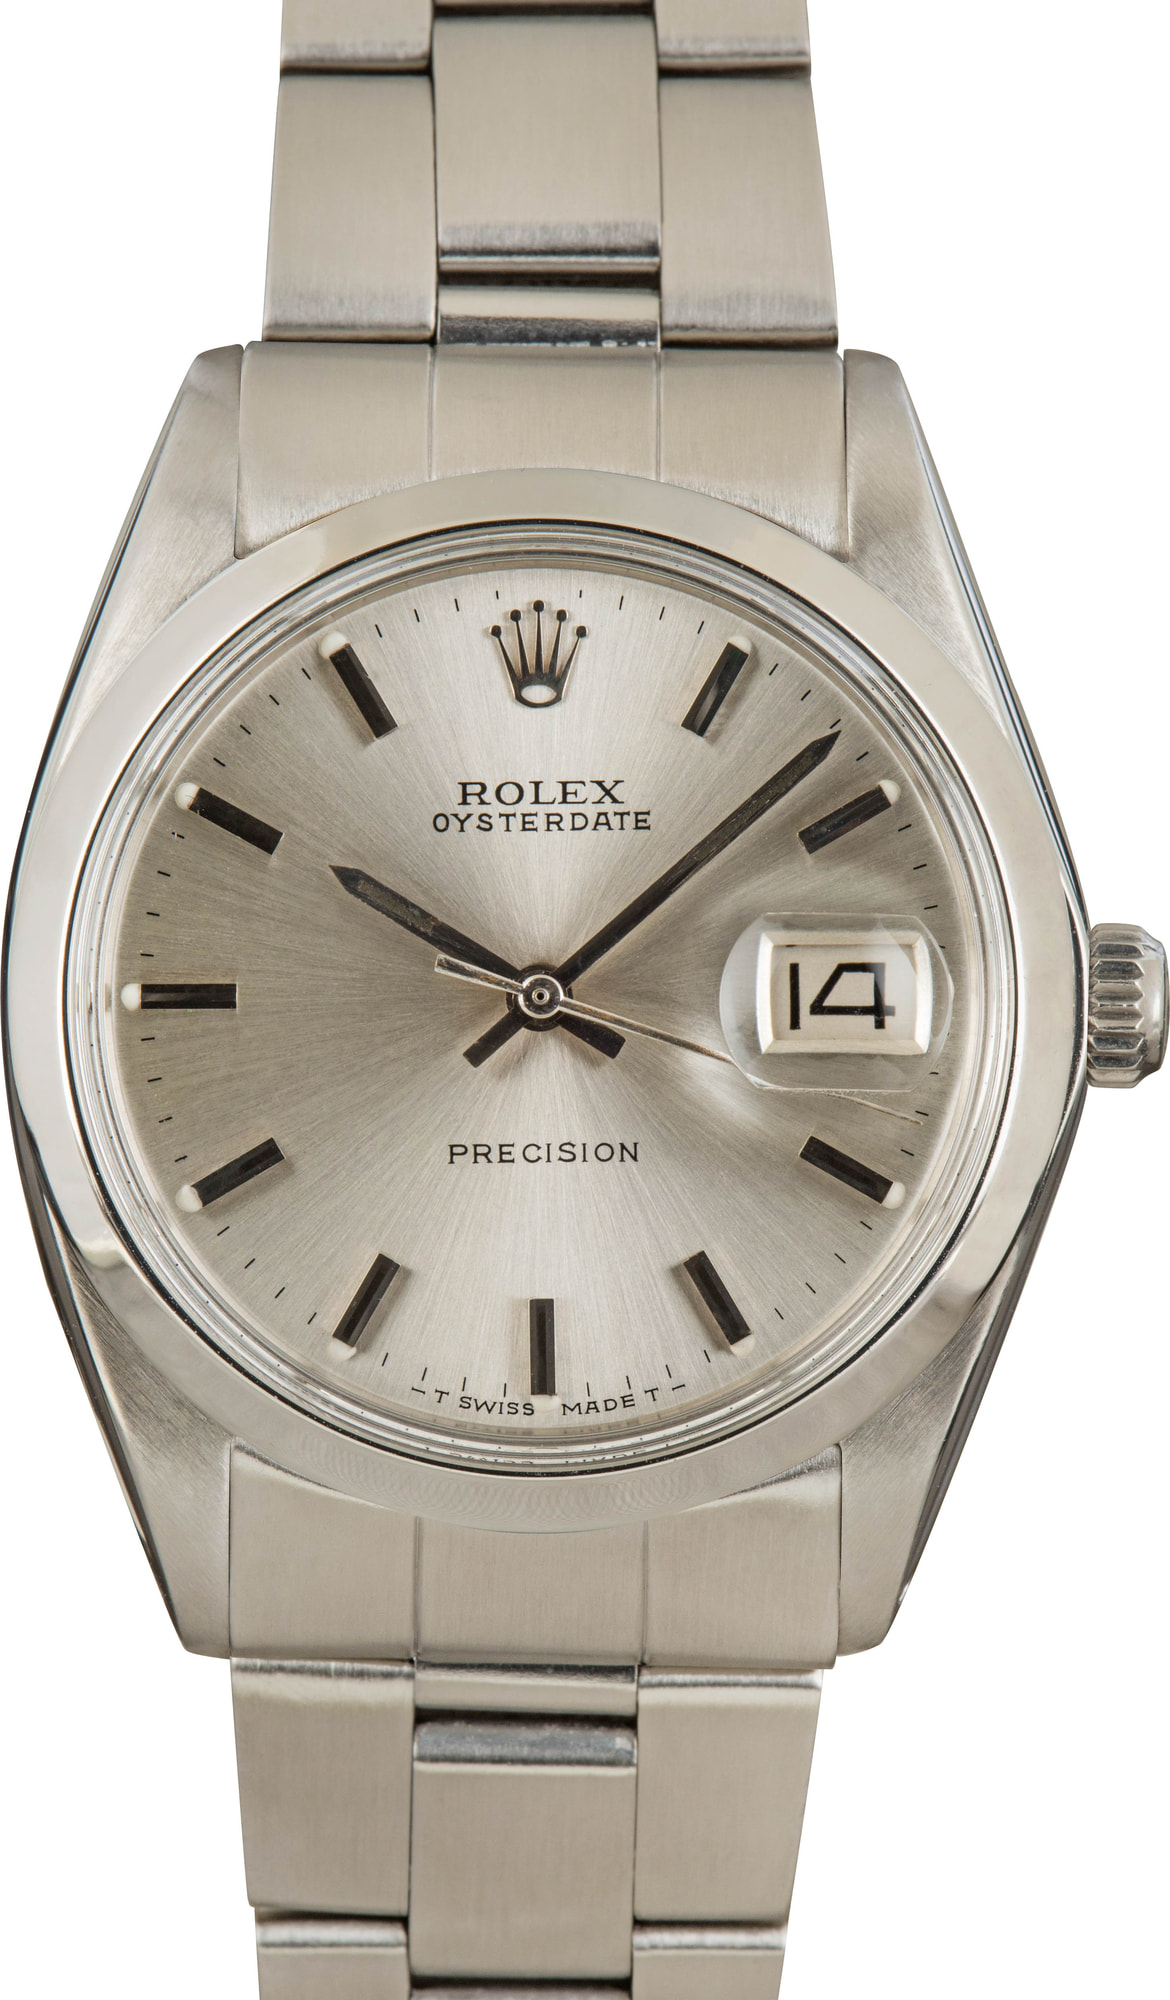 Buy Used Rolex OysterDate 6694 | Bob's Watches - Sku: 163156